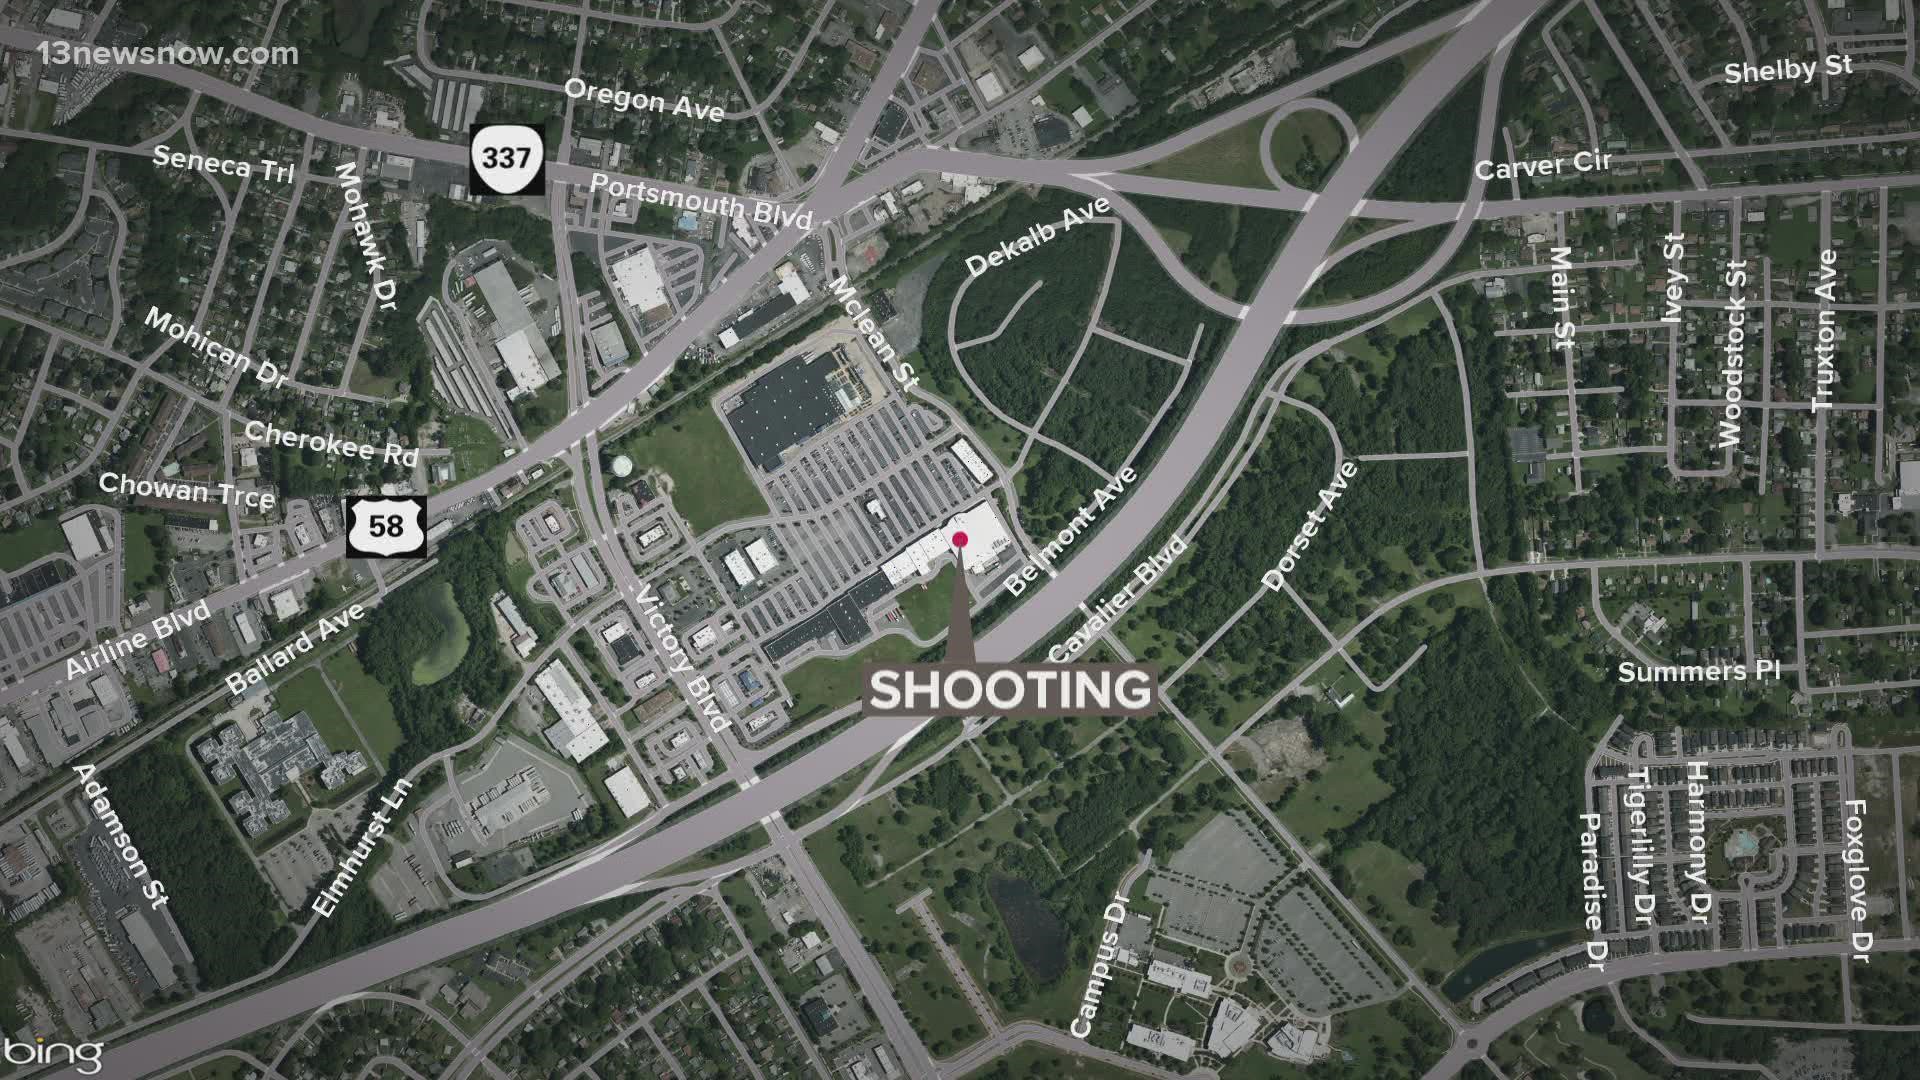 The shooting happened around 2 a.m. near the 4000 block of Victory Blvd.